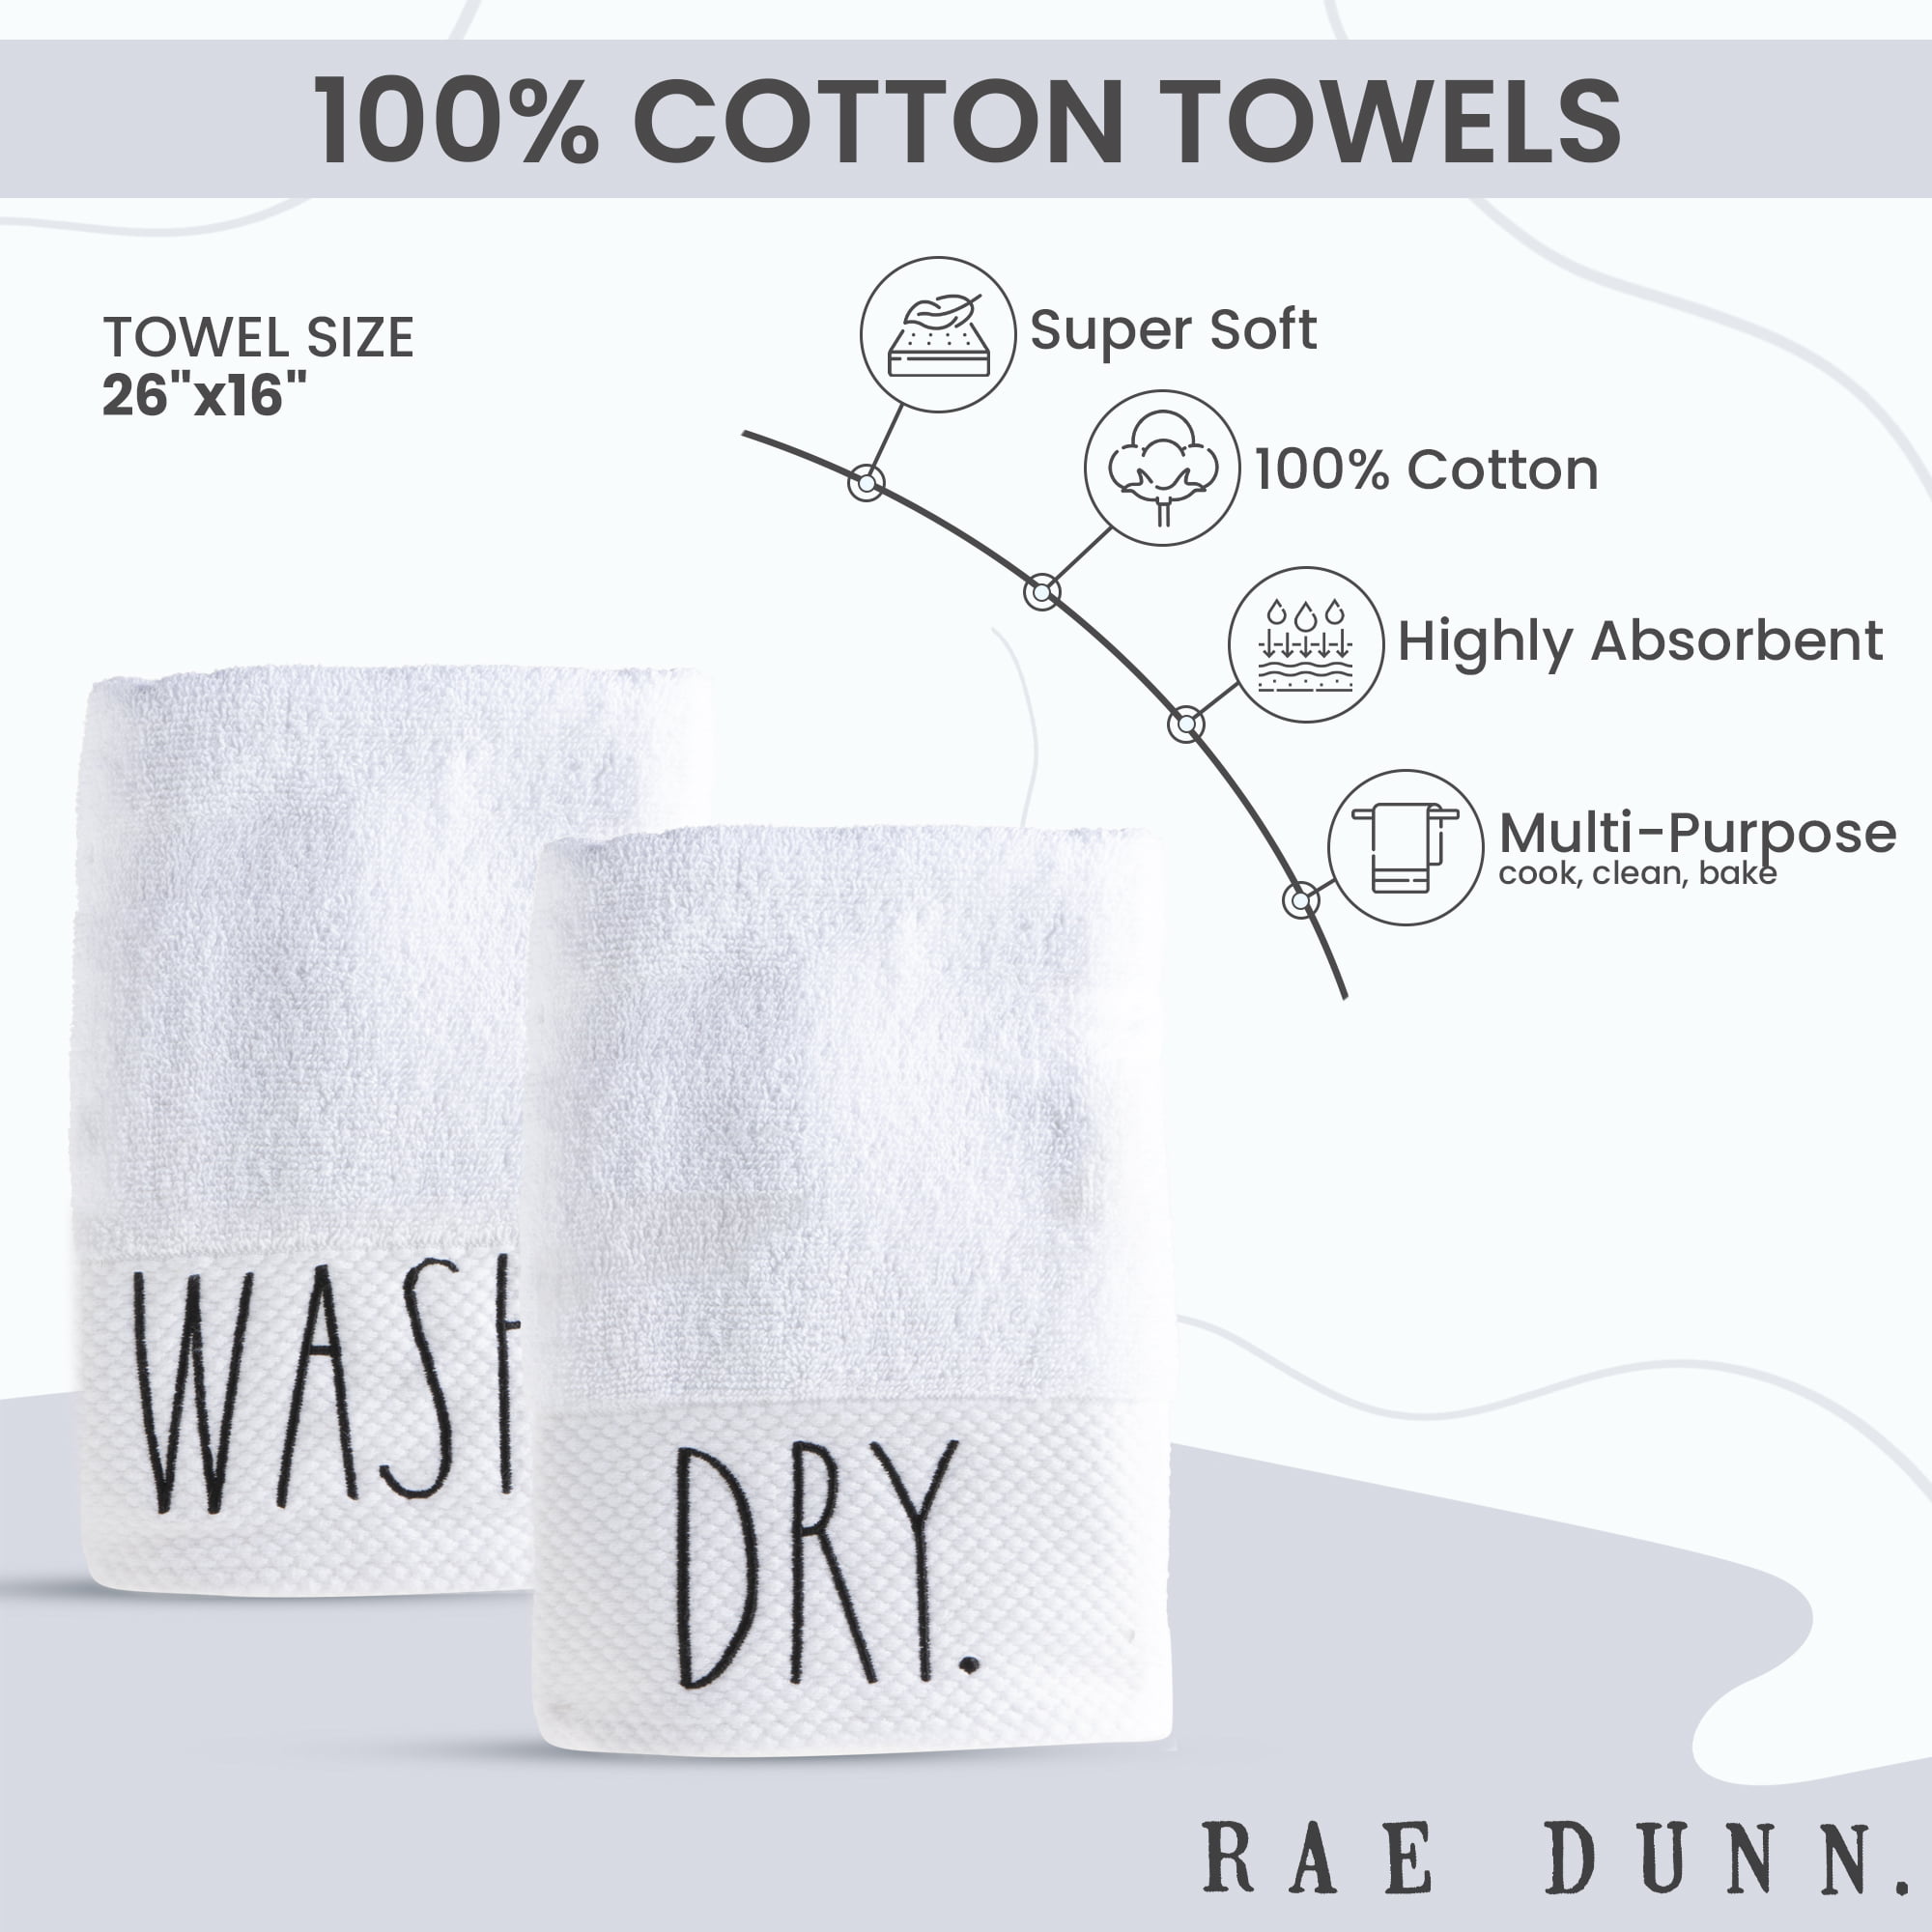 Rae Dunn Hand Towels, Embroidered Decorative Kitchen Towel for Kitchen and  Bathroom, 100% Cotton, Highly Absorbent, 3 Pack, 16x26, Embroidered Happy